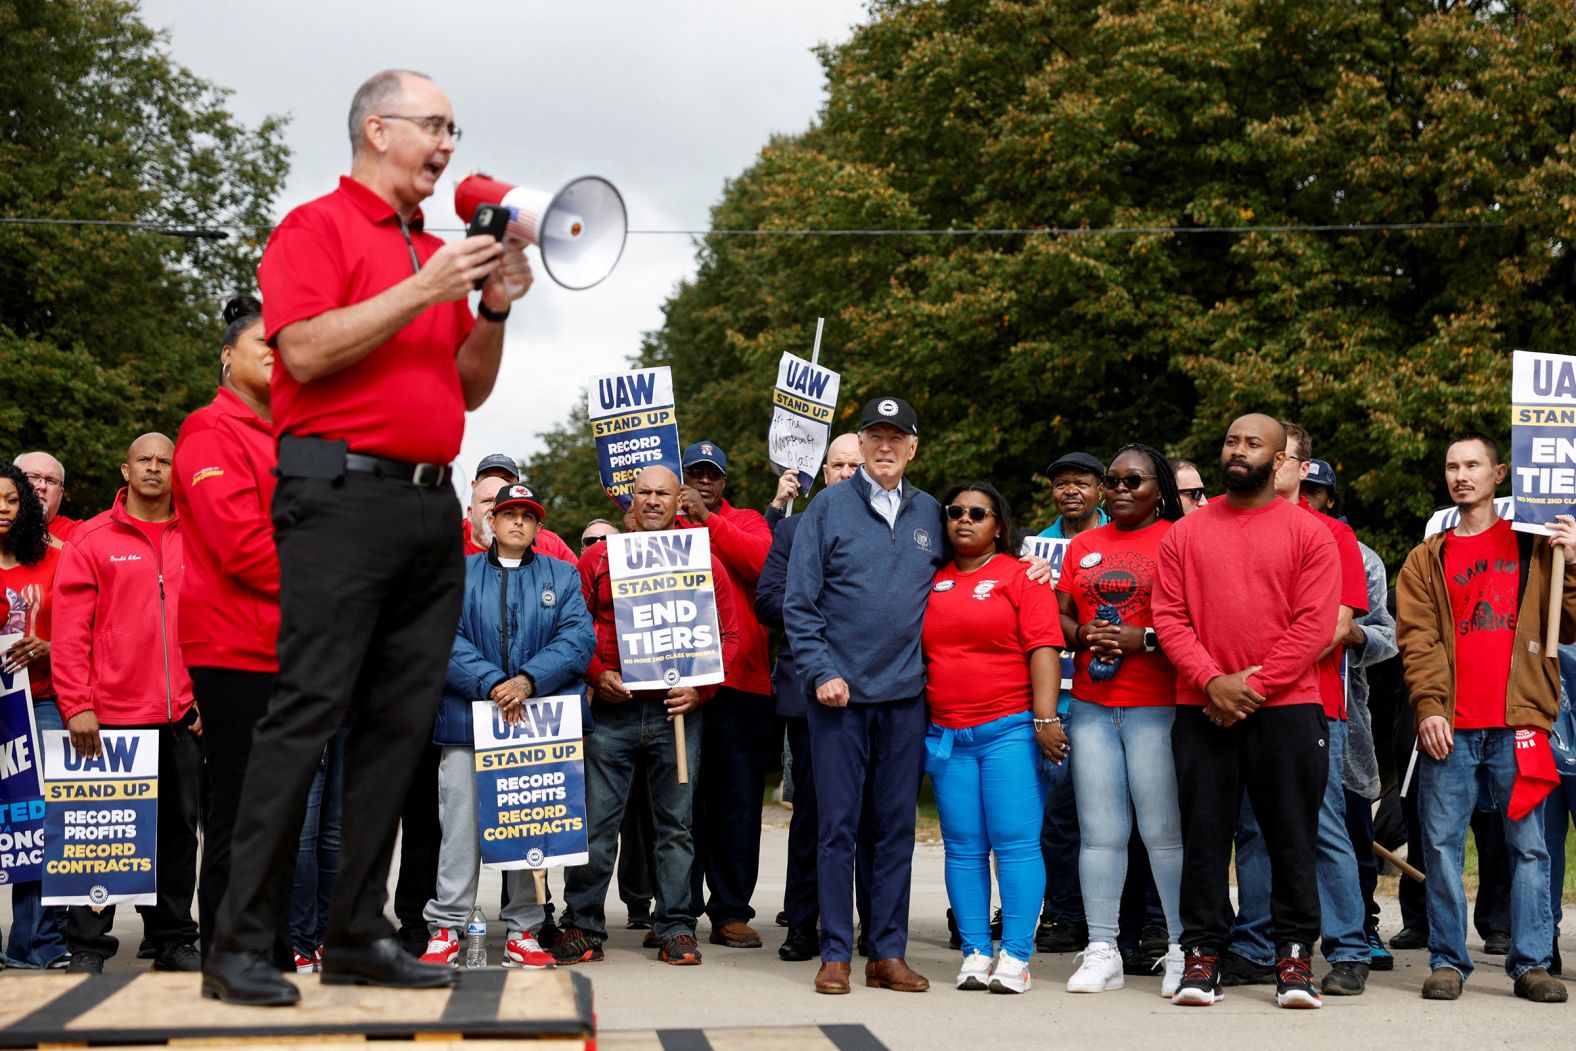 Shawn Fain, president of the United Auto Workers, speaks as Biden, center, joins <a href="index.php?page=&url=https%3A%2F%2Fwww.cnn.com%2F2023%2F09%2F26%2Fpolitics%2Fbiden-picket-line-michigan-uaw%2Findex.html" target="_blank">striking union members </a>on the picket line in Belleville, Michigan. Biden made history by being the first sitting president to join a picket line.